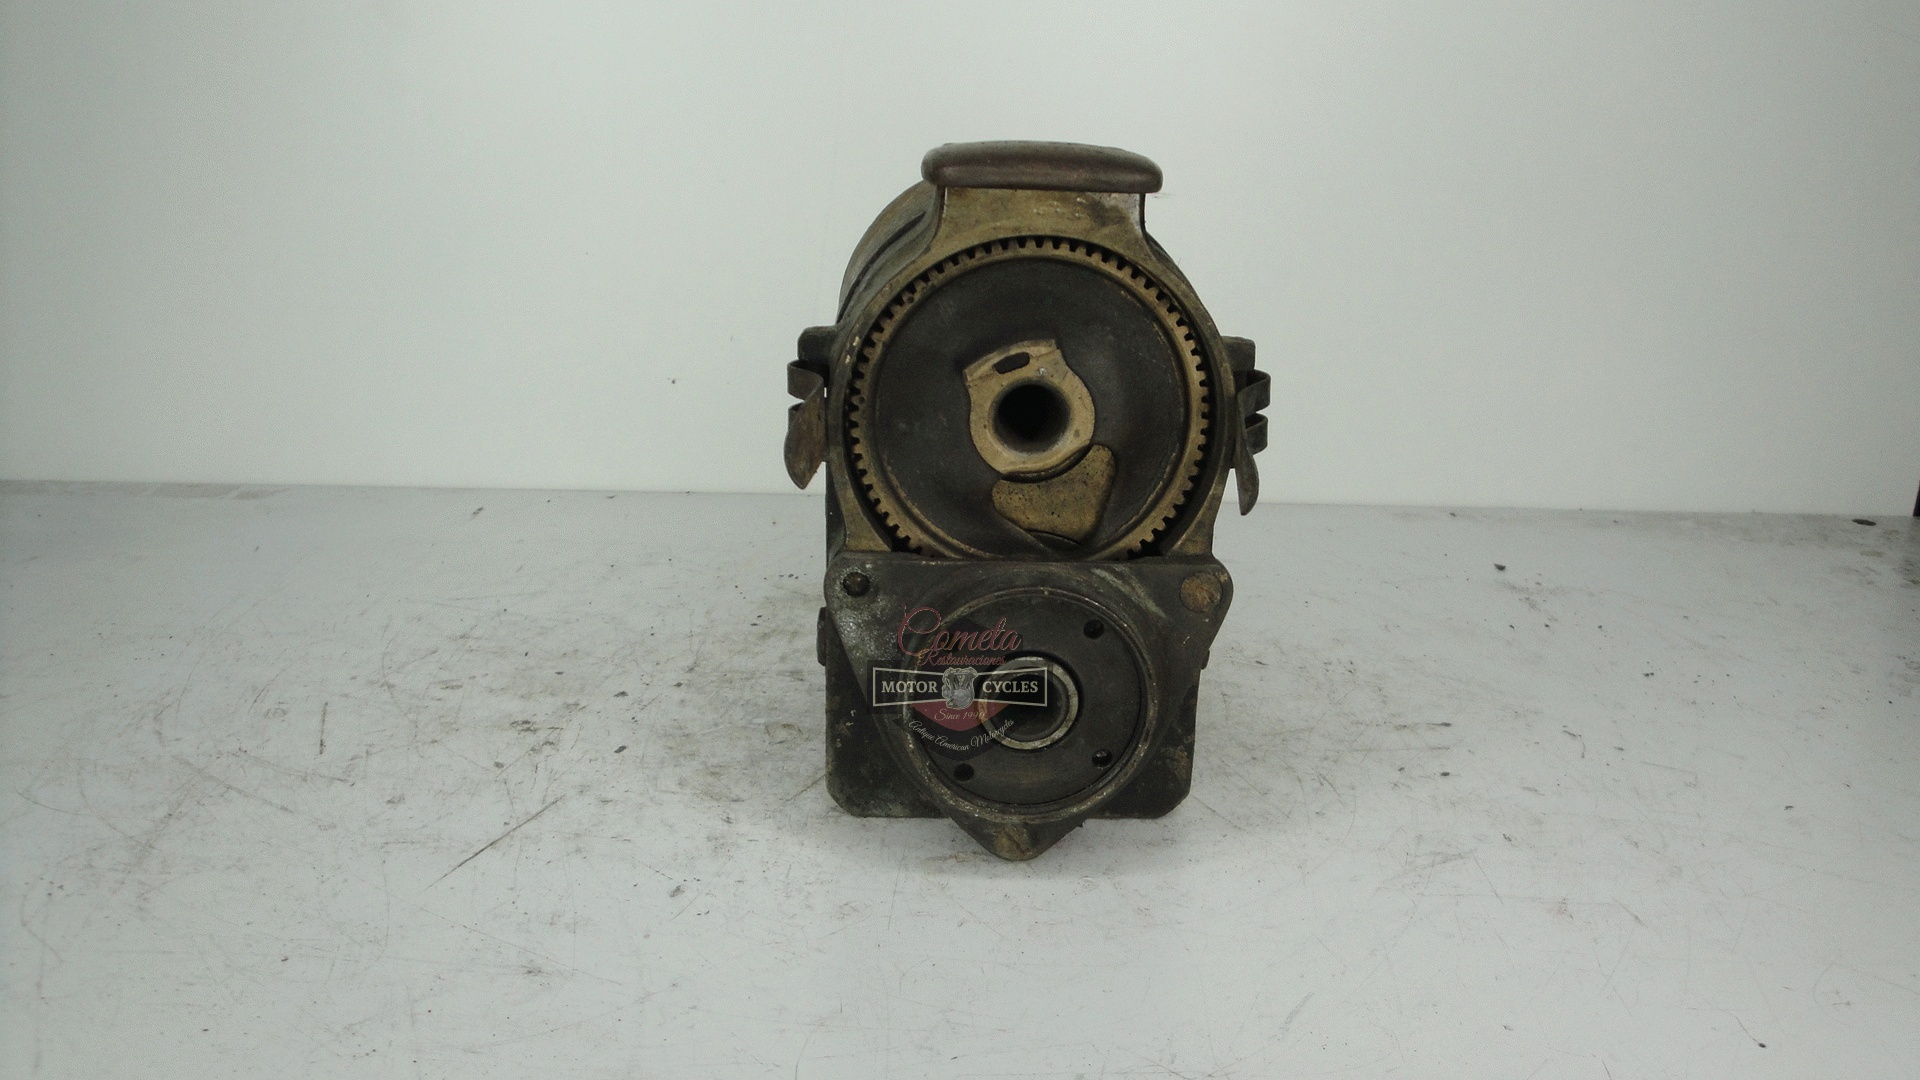 MAGNETO BOSCH TYPE ZF4 COCHE / CAMION / TRACTOR / AÑOS 1920 / 1930 / 1940 